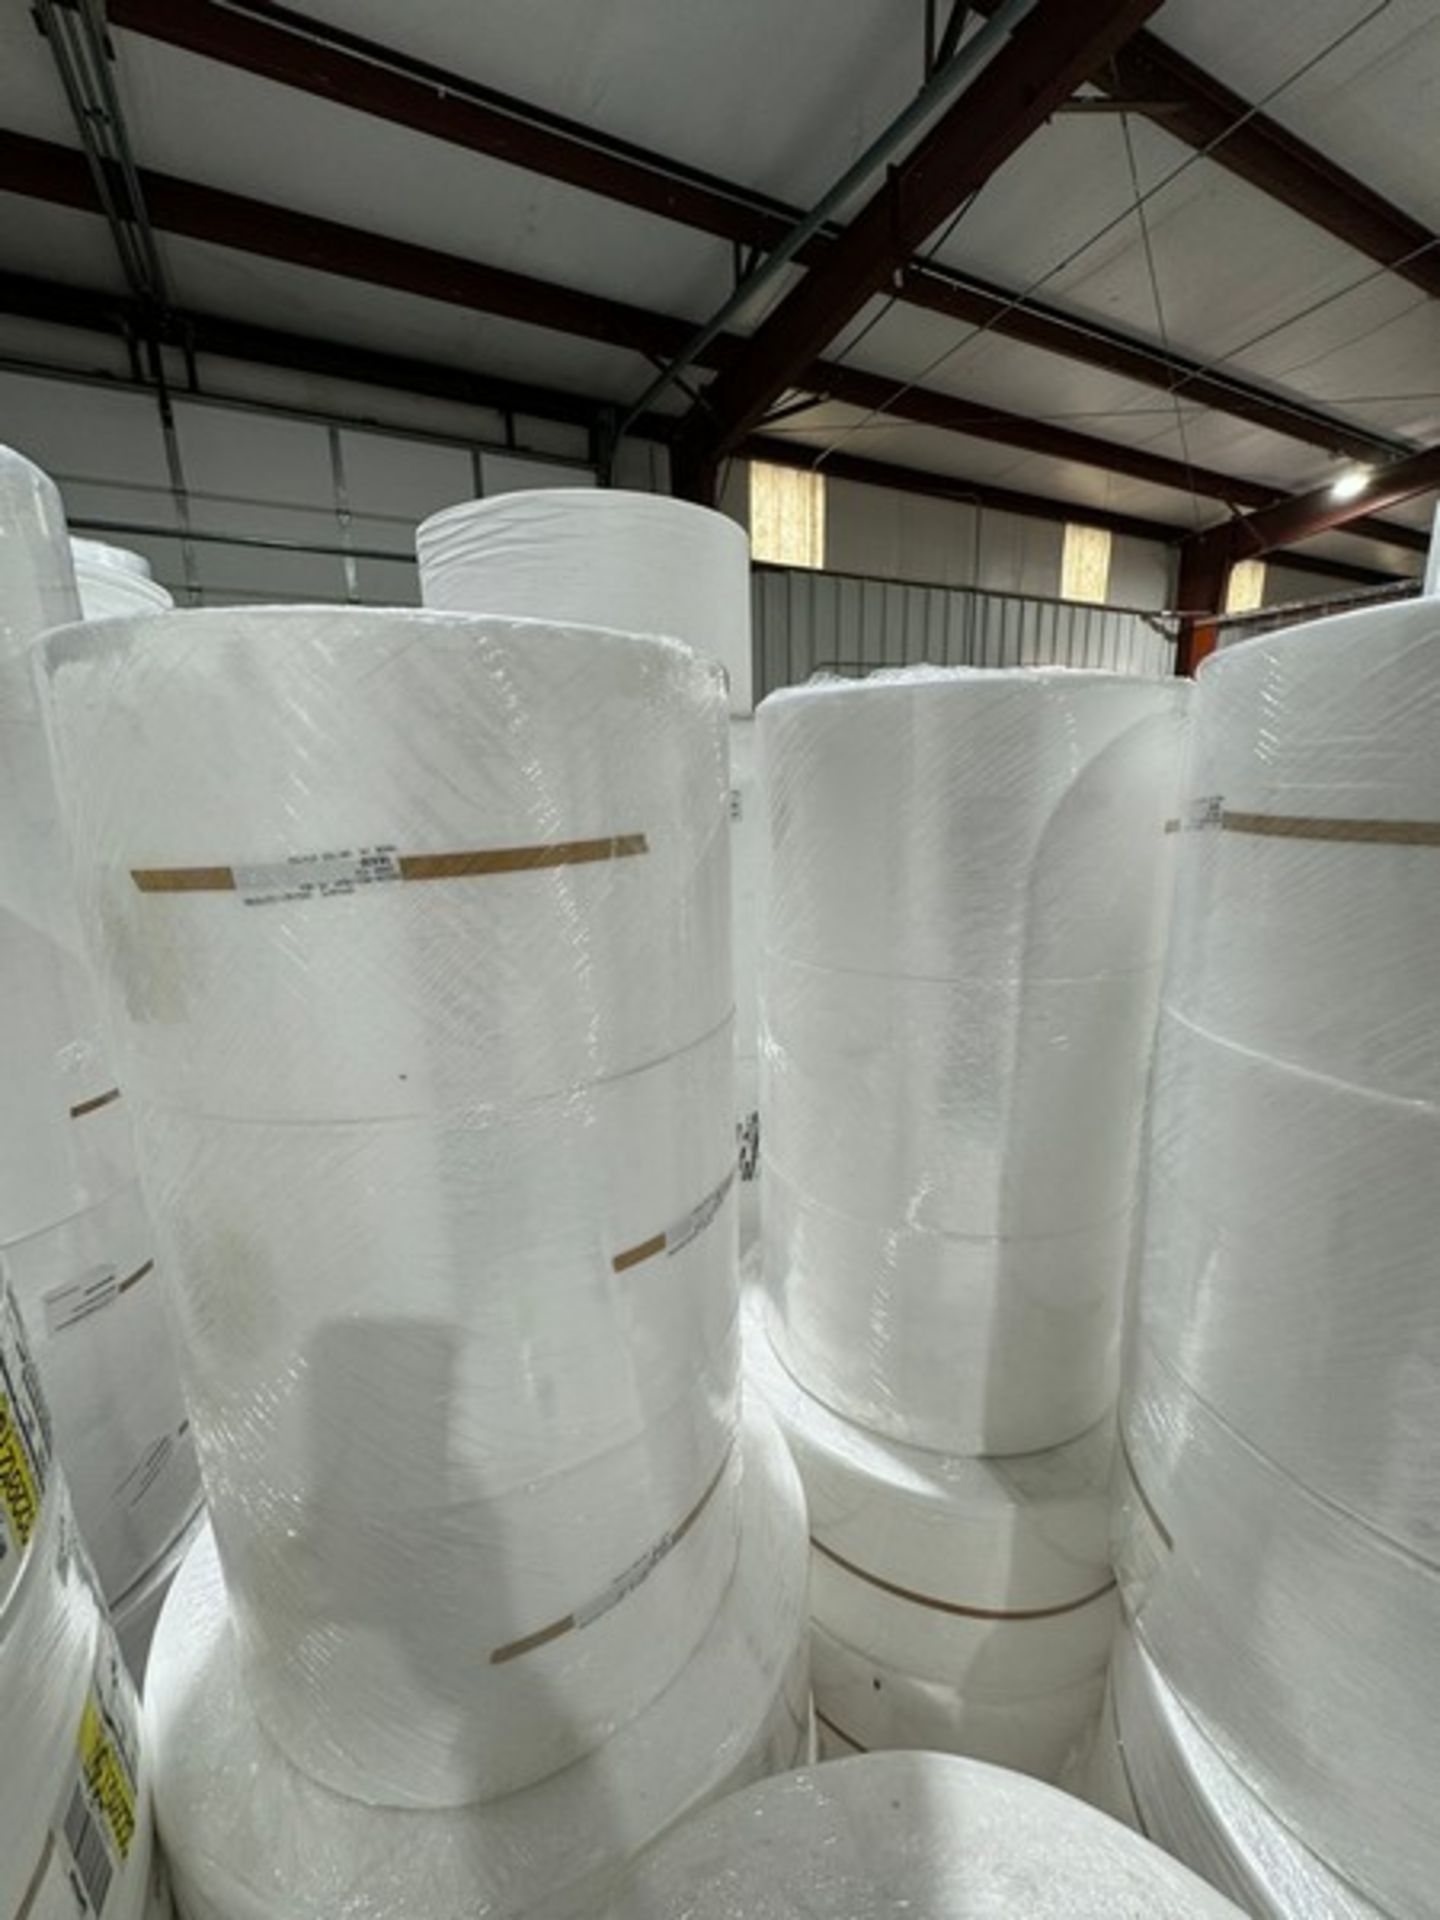 (72) Rolls of NEW Spun Bond, On 4-Pallets (LOCATED IN MOUNT HOME, AR) - Image 2 of 2